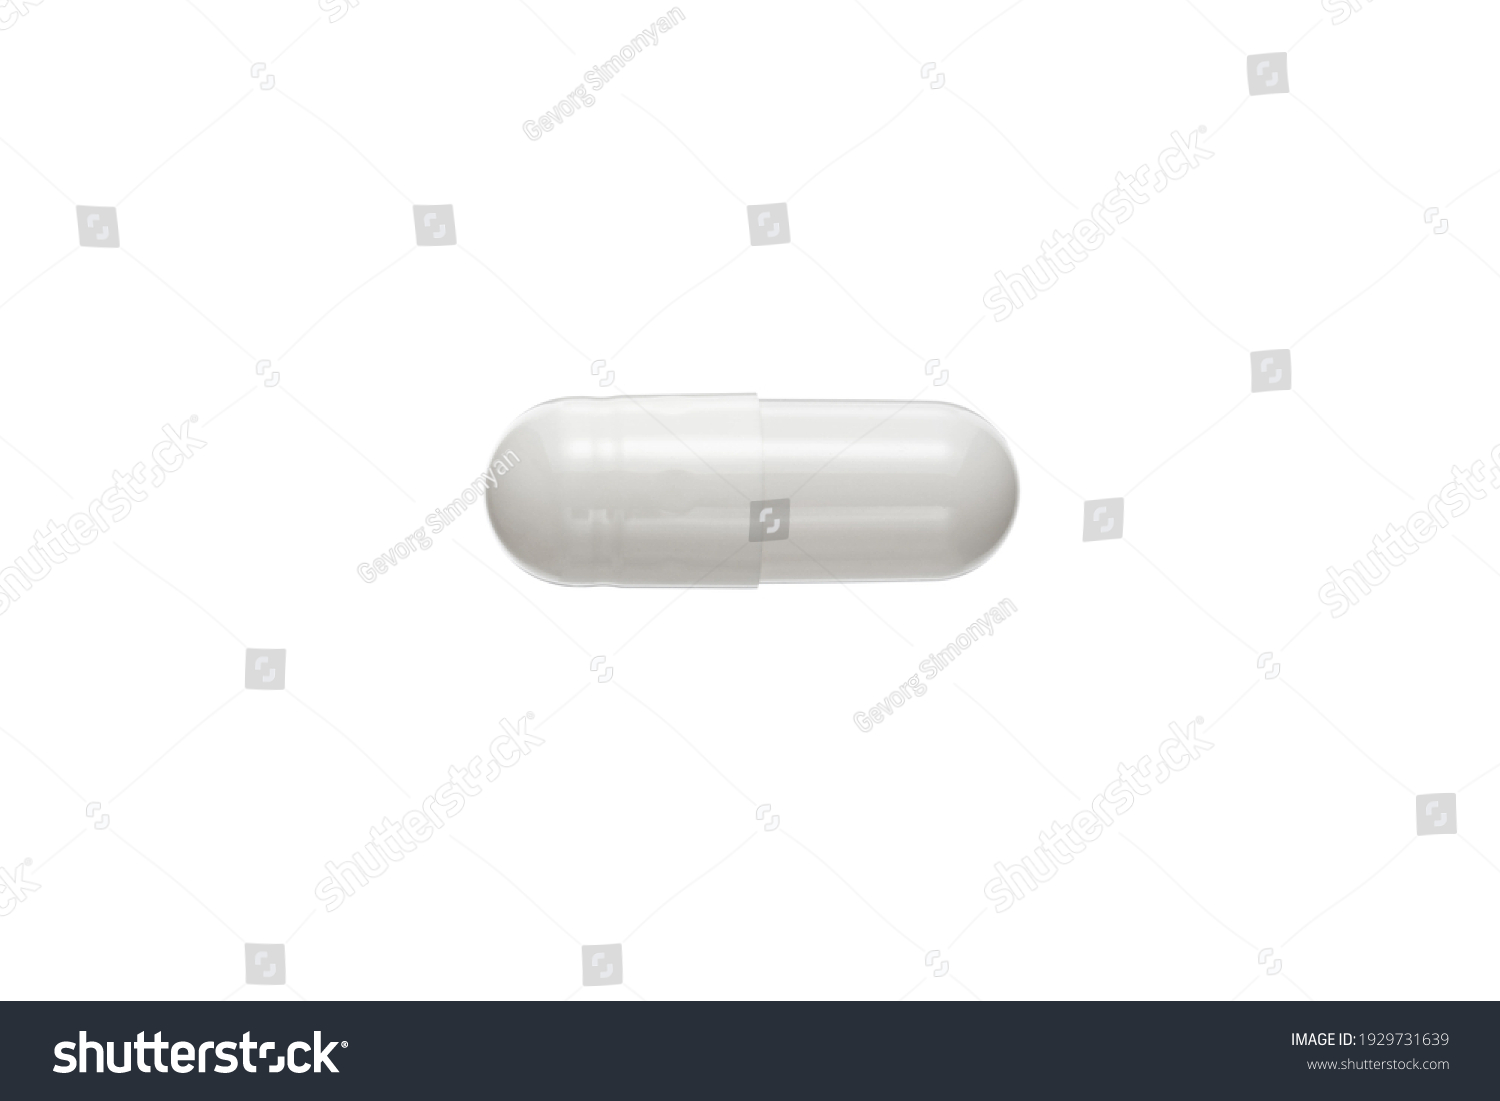 Tablet in capsule. Capsule pill on white background #1929731639